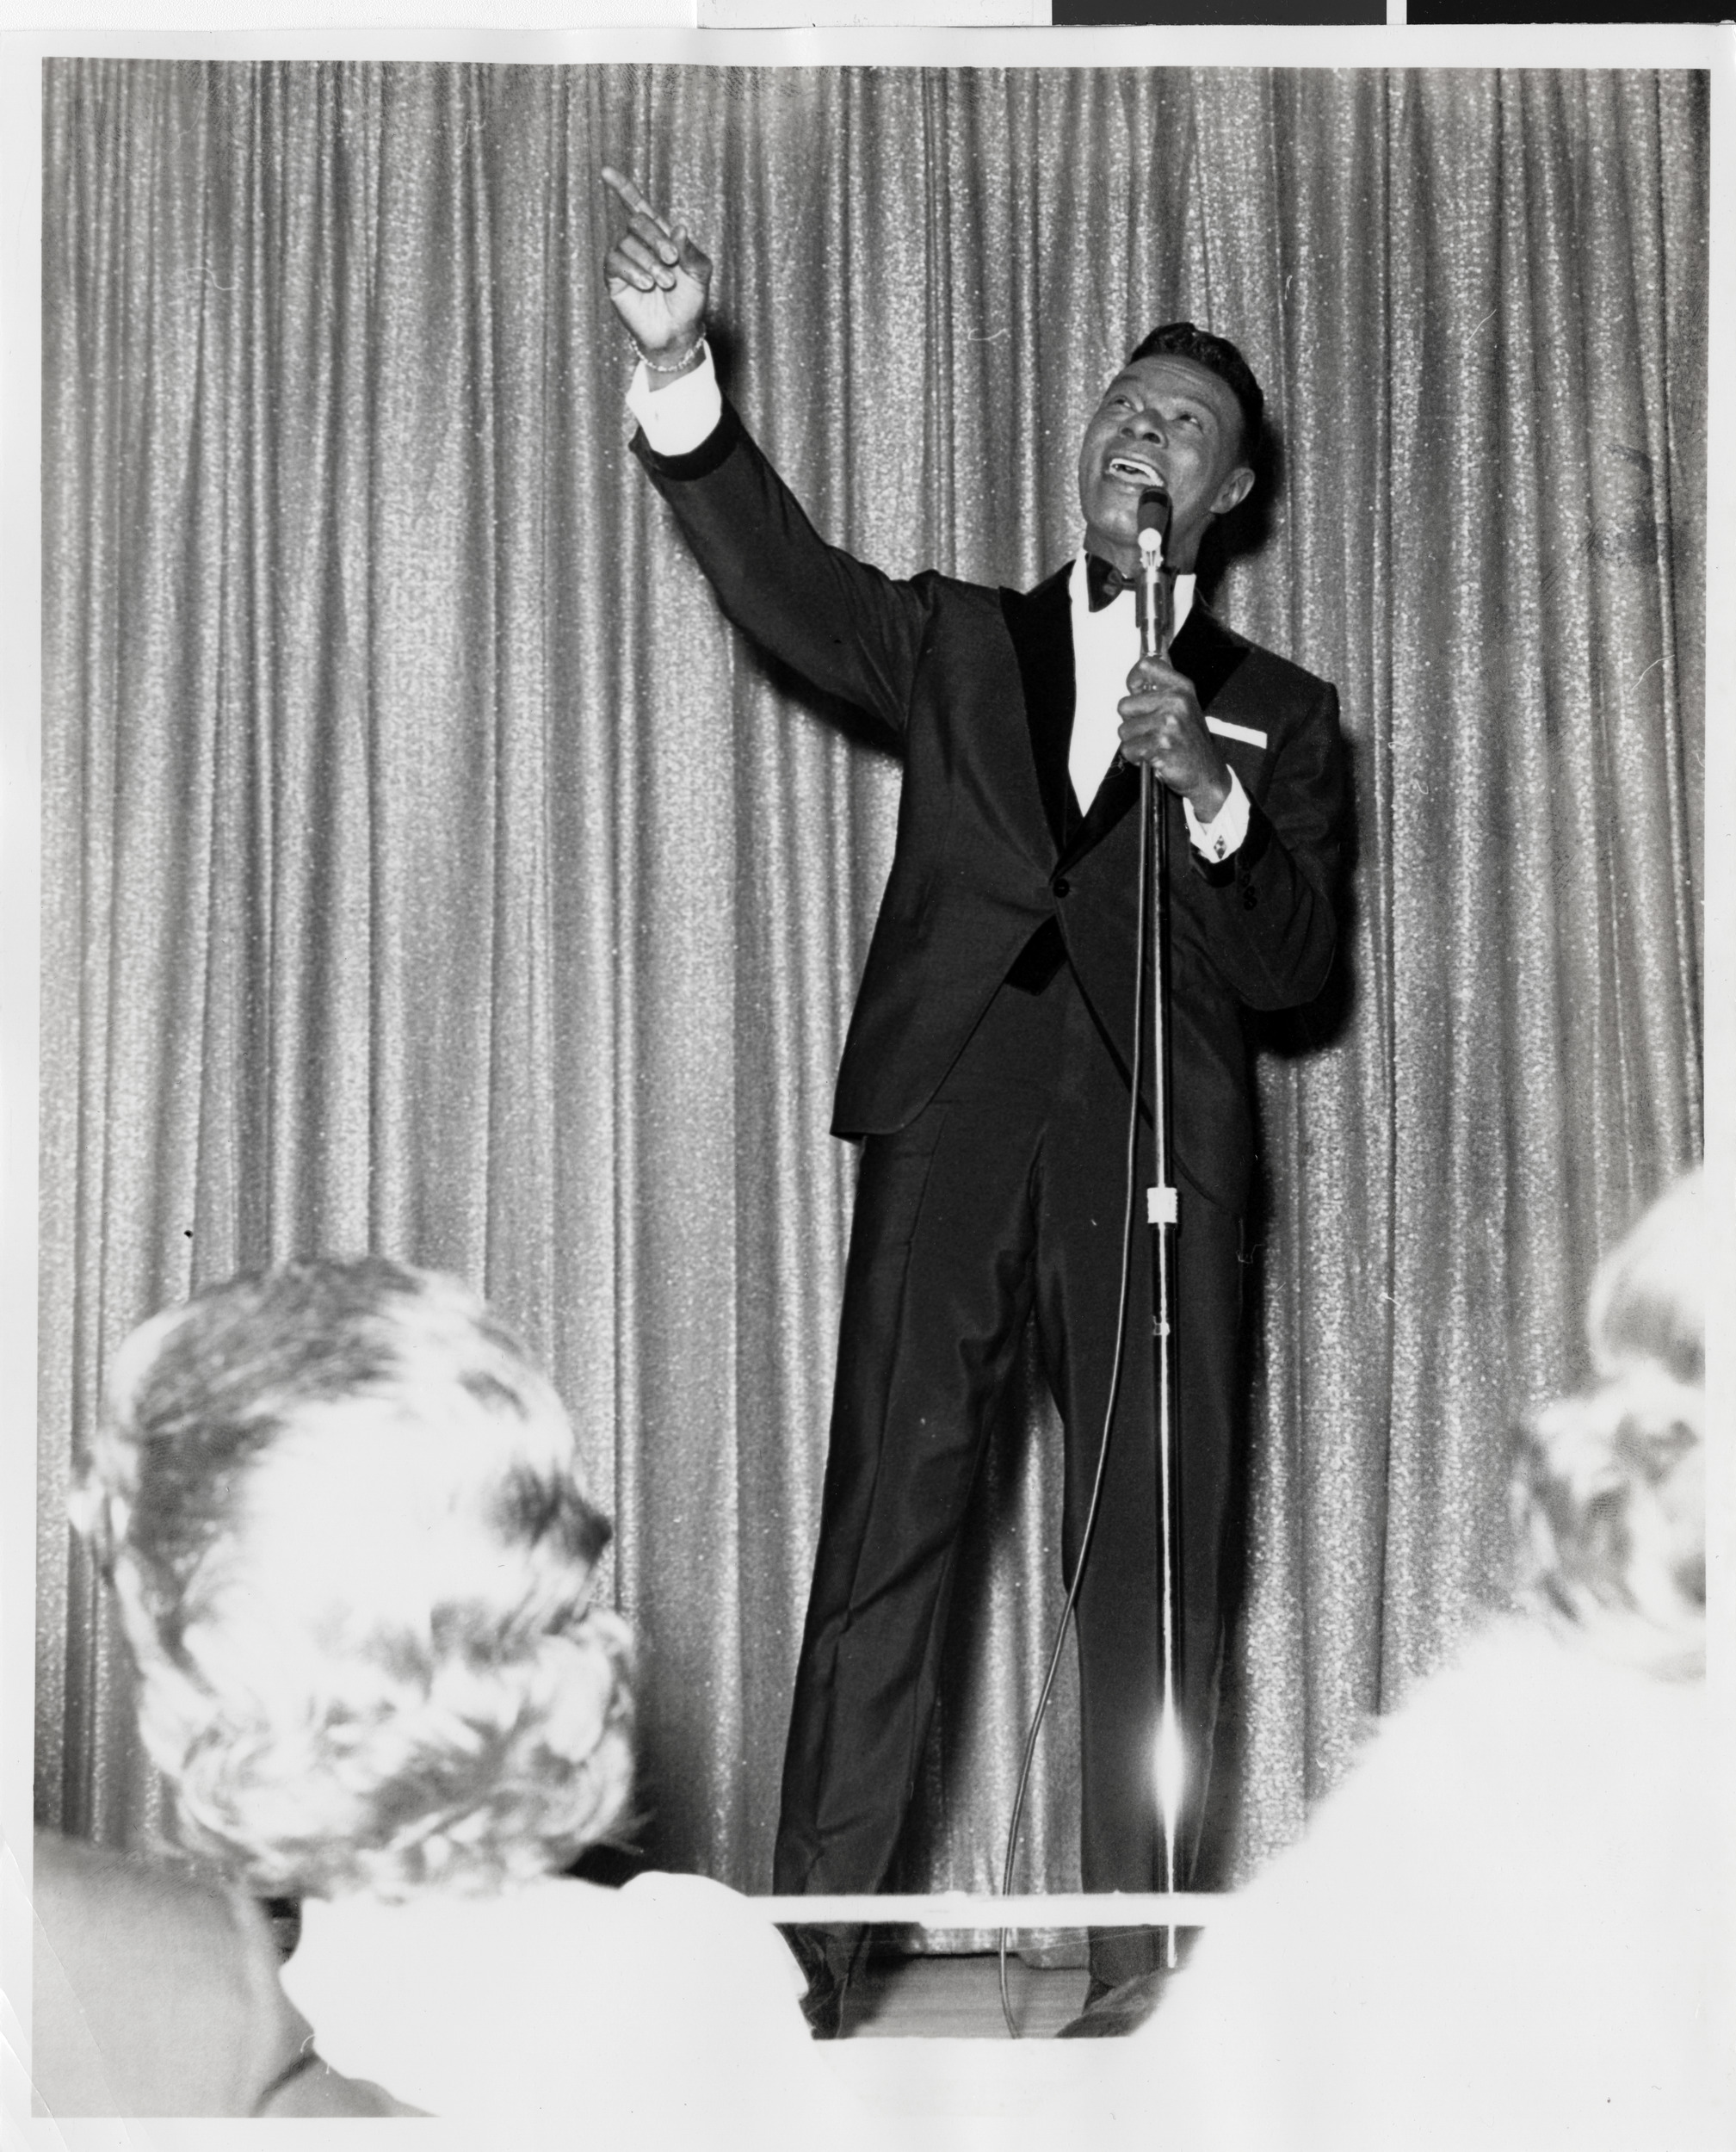 Cole onstage, image 008